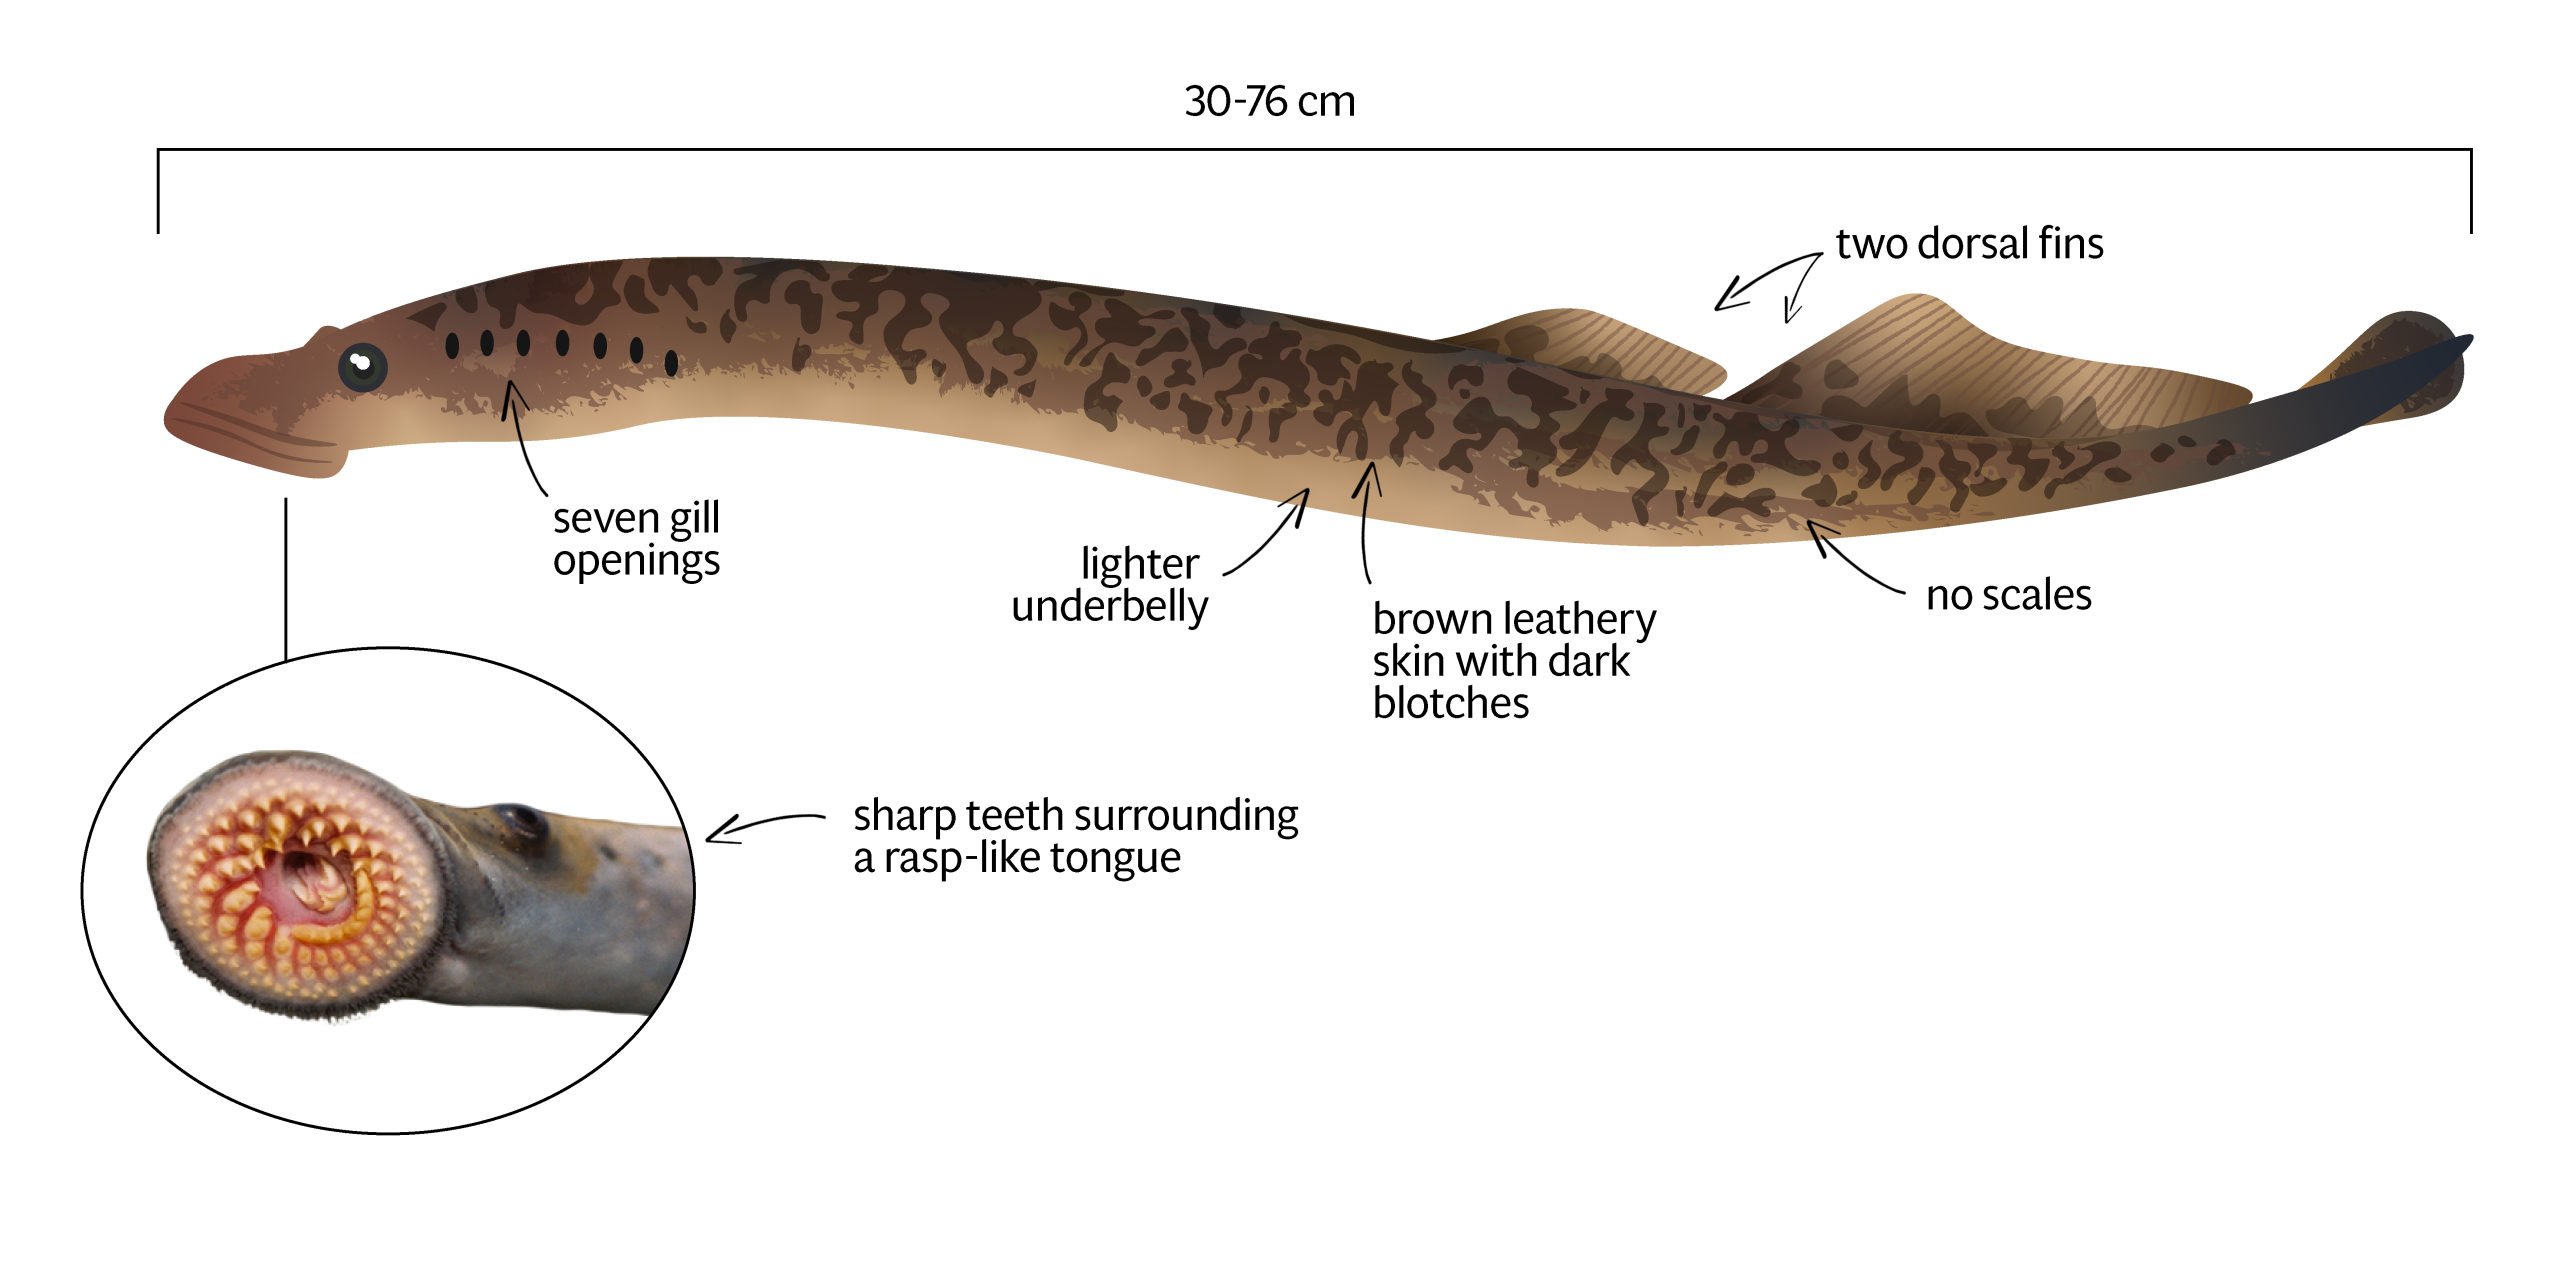 Sea Lamprey Profile And Resources, What Are Lampreys